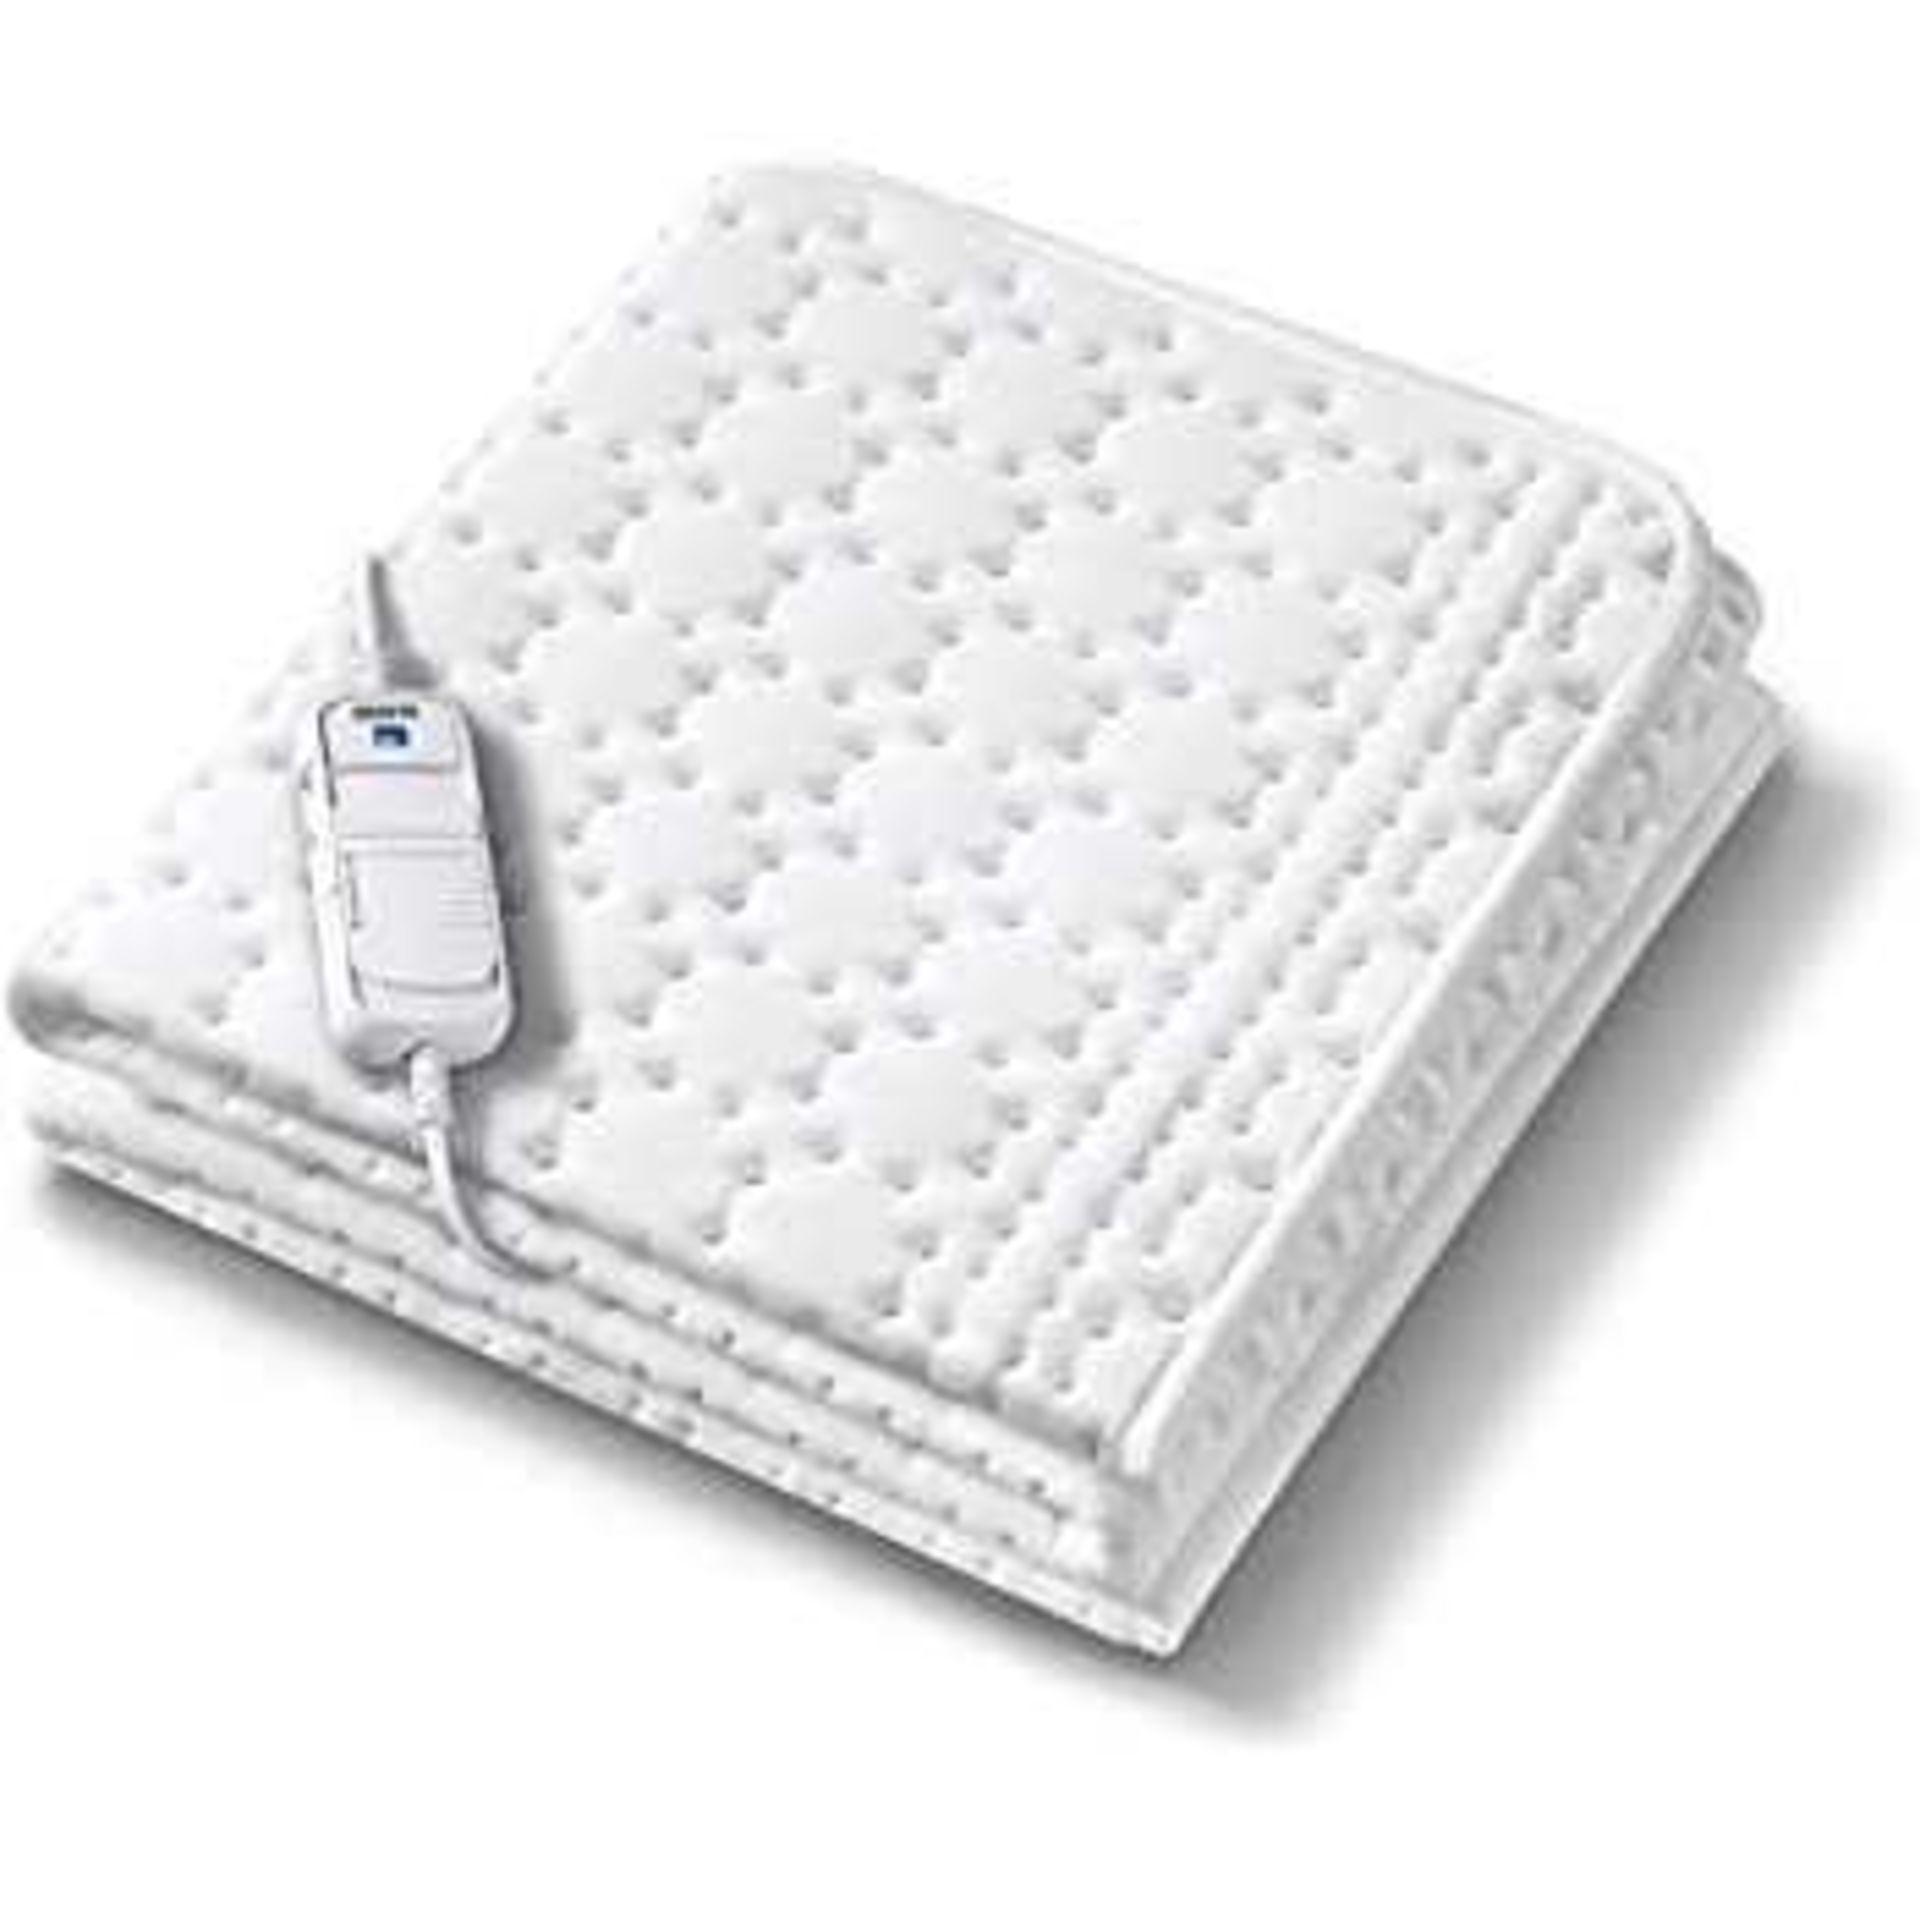 Combined RRP £180 Lot To Contain 2 Monogram Allergy Free Heated Mattress Cover Untested - Image 2 of 2